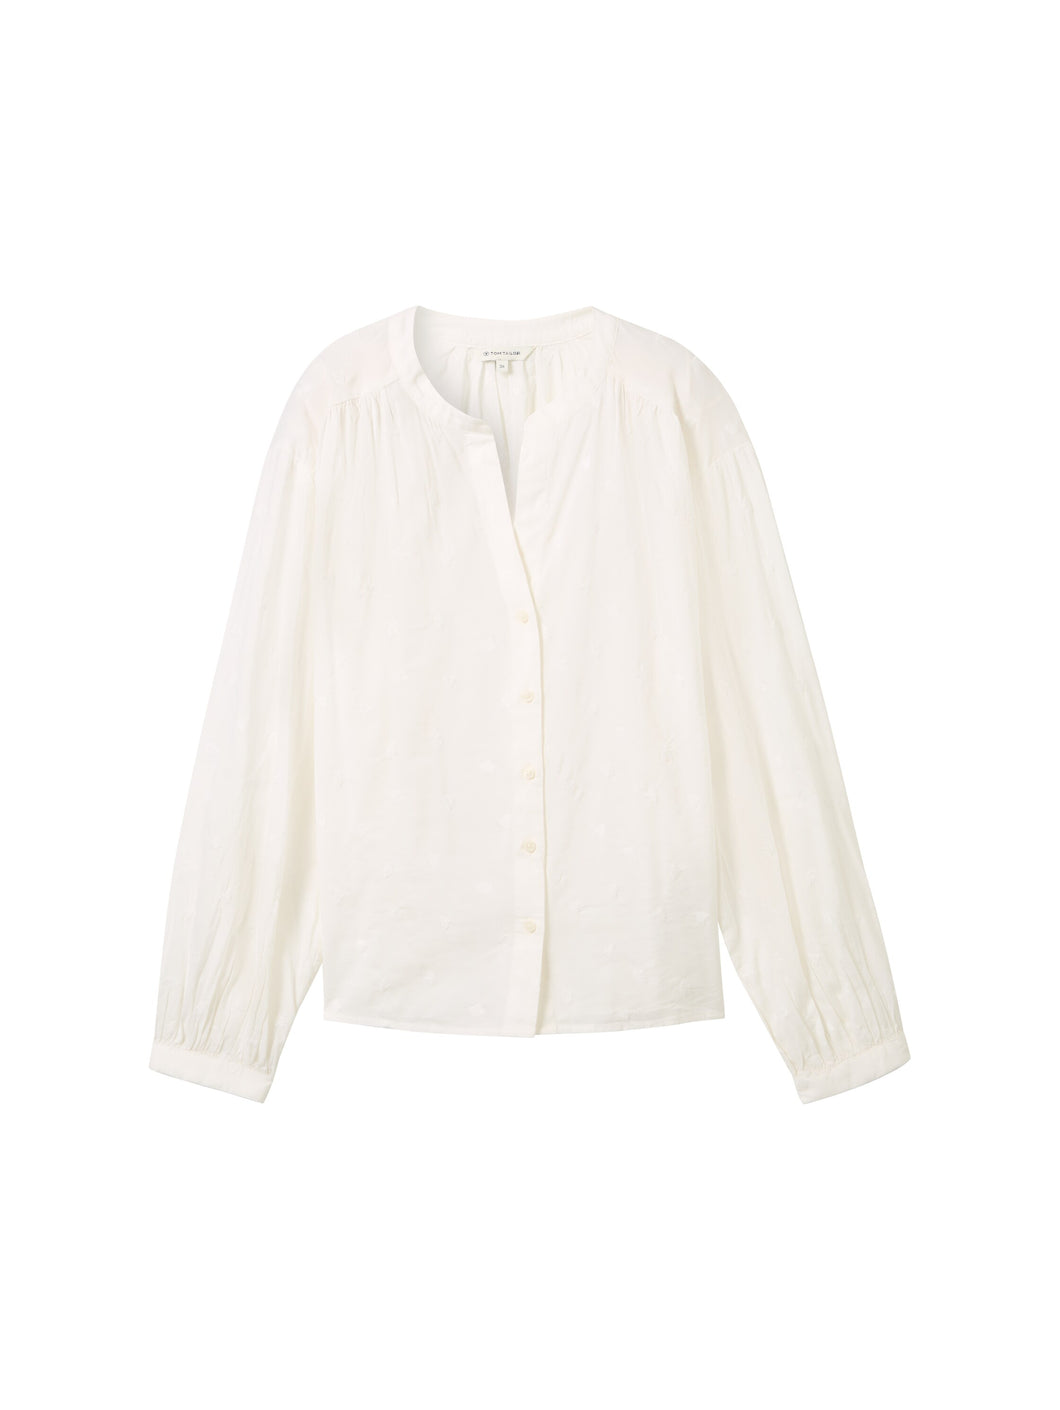 TOM TAILOR EMBROIDERED BLOUSE off white tonal embroidery